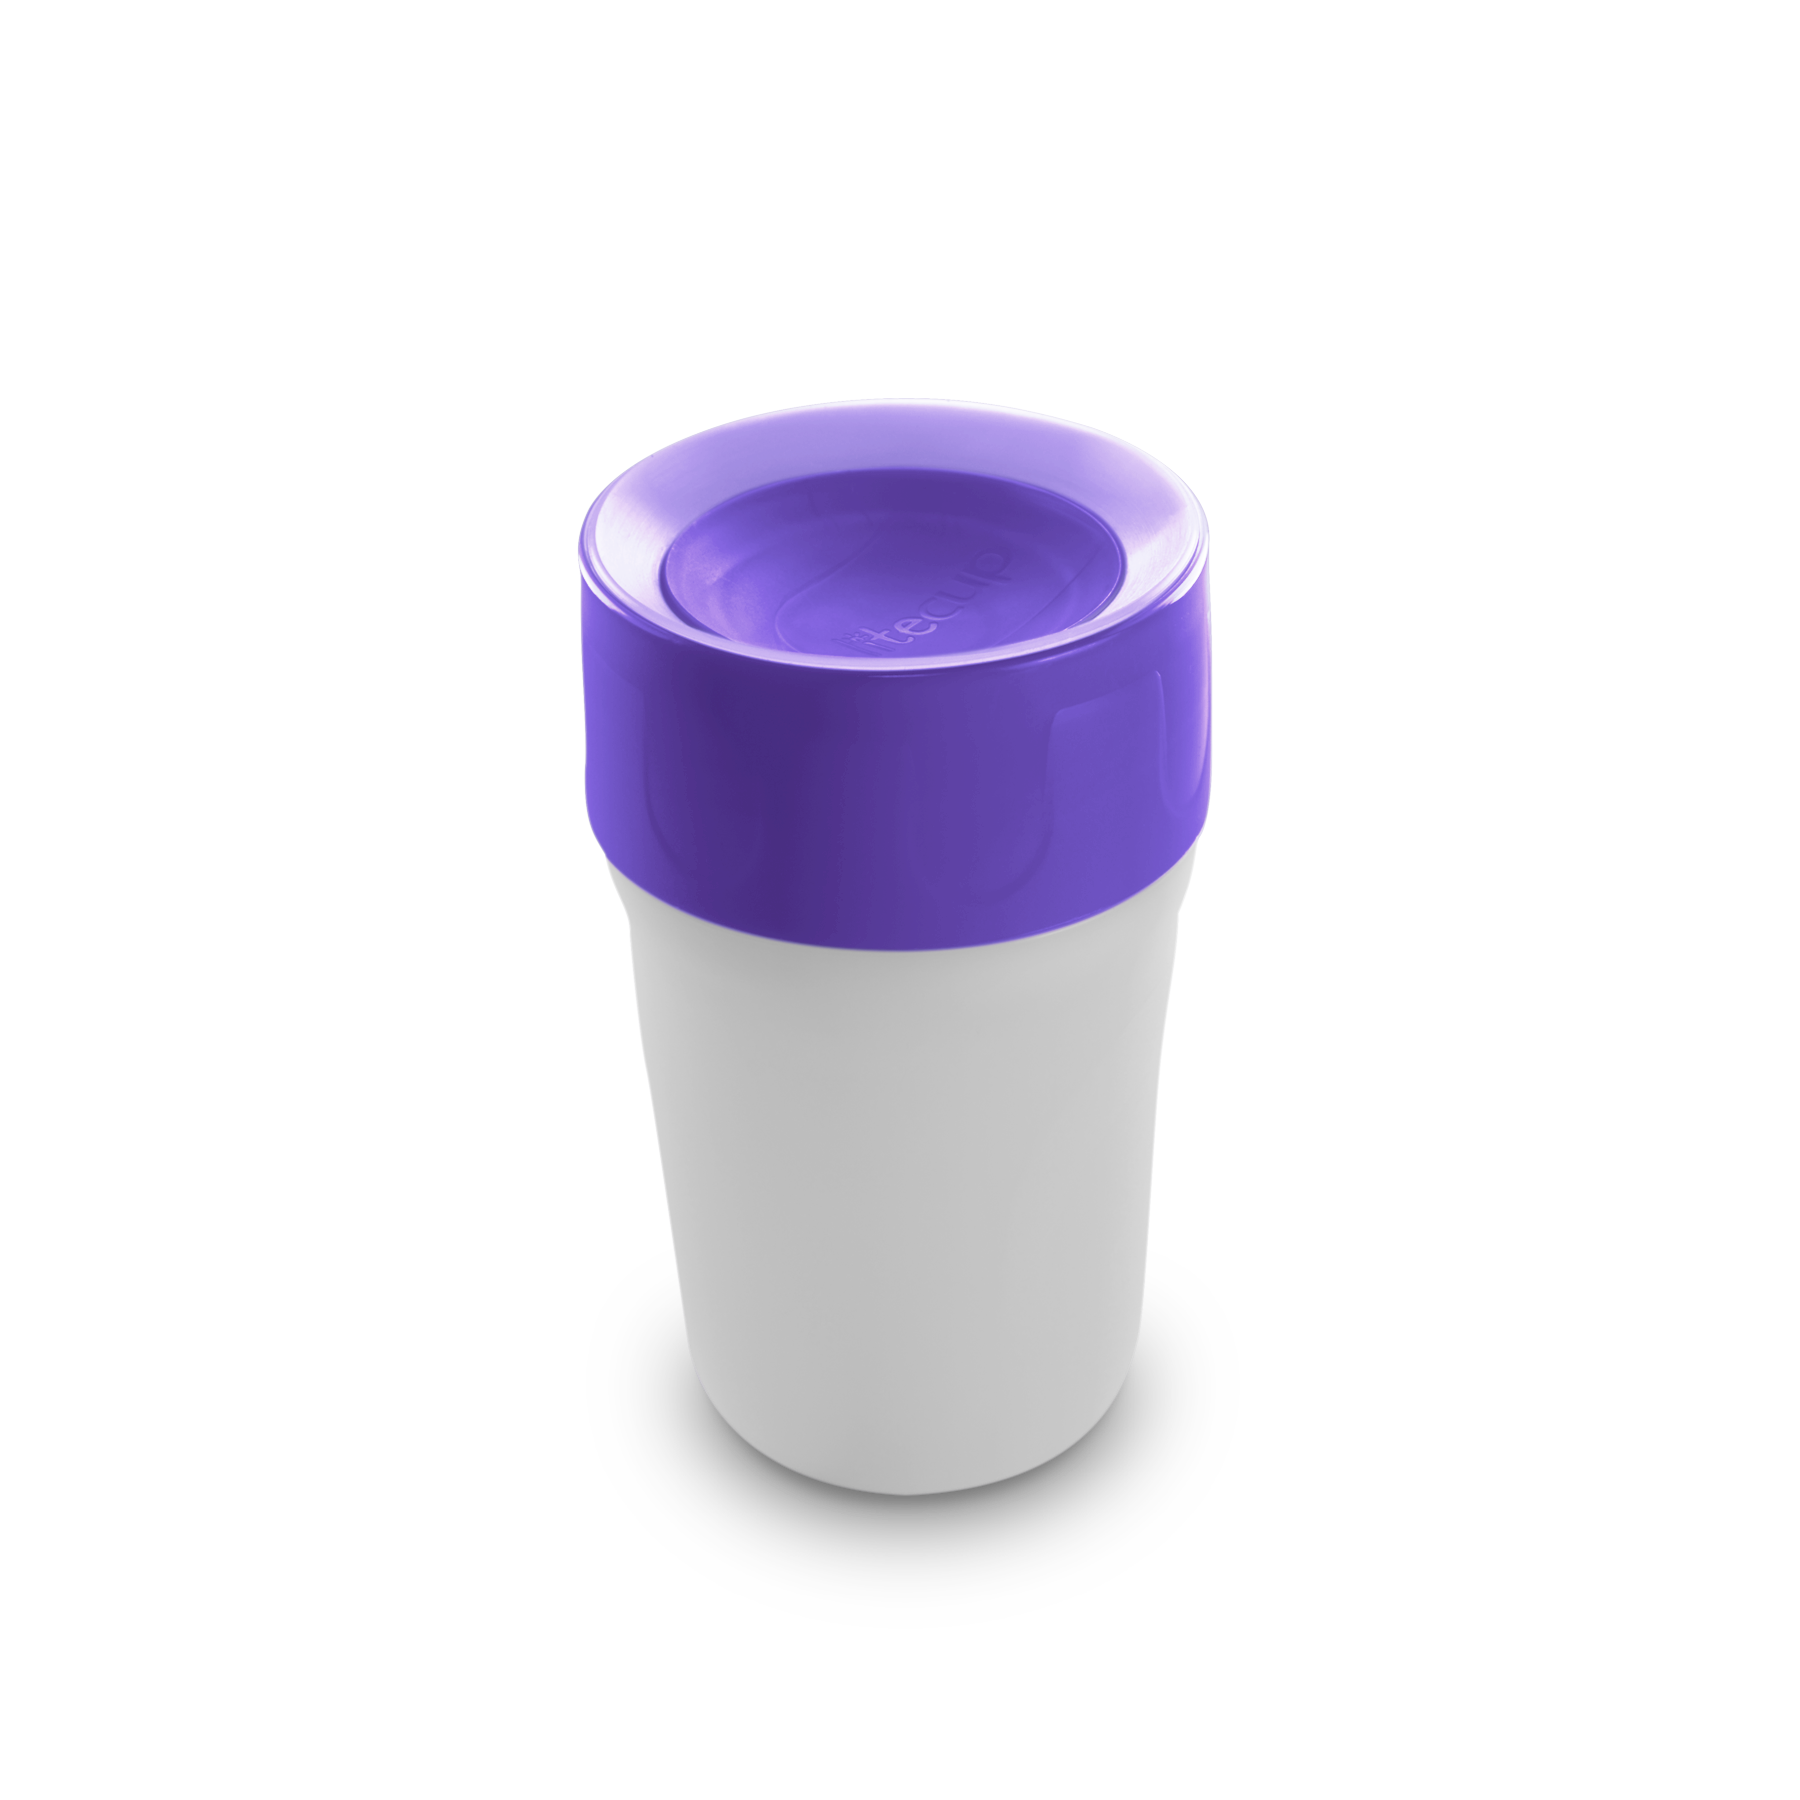 litecup - no spill sippy cup & nightlight - colour clear